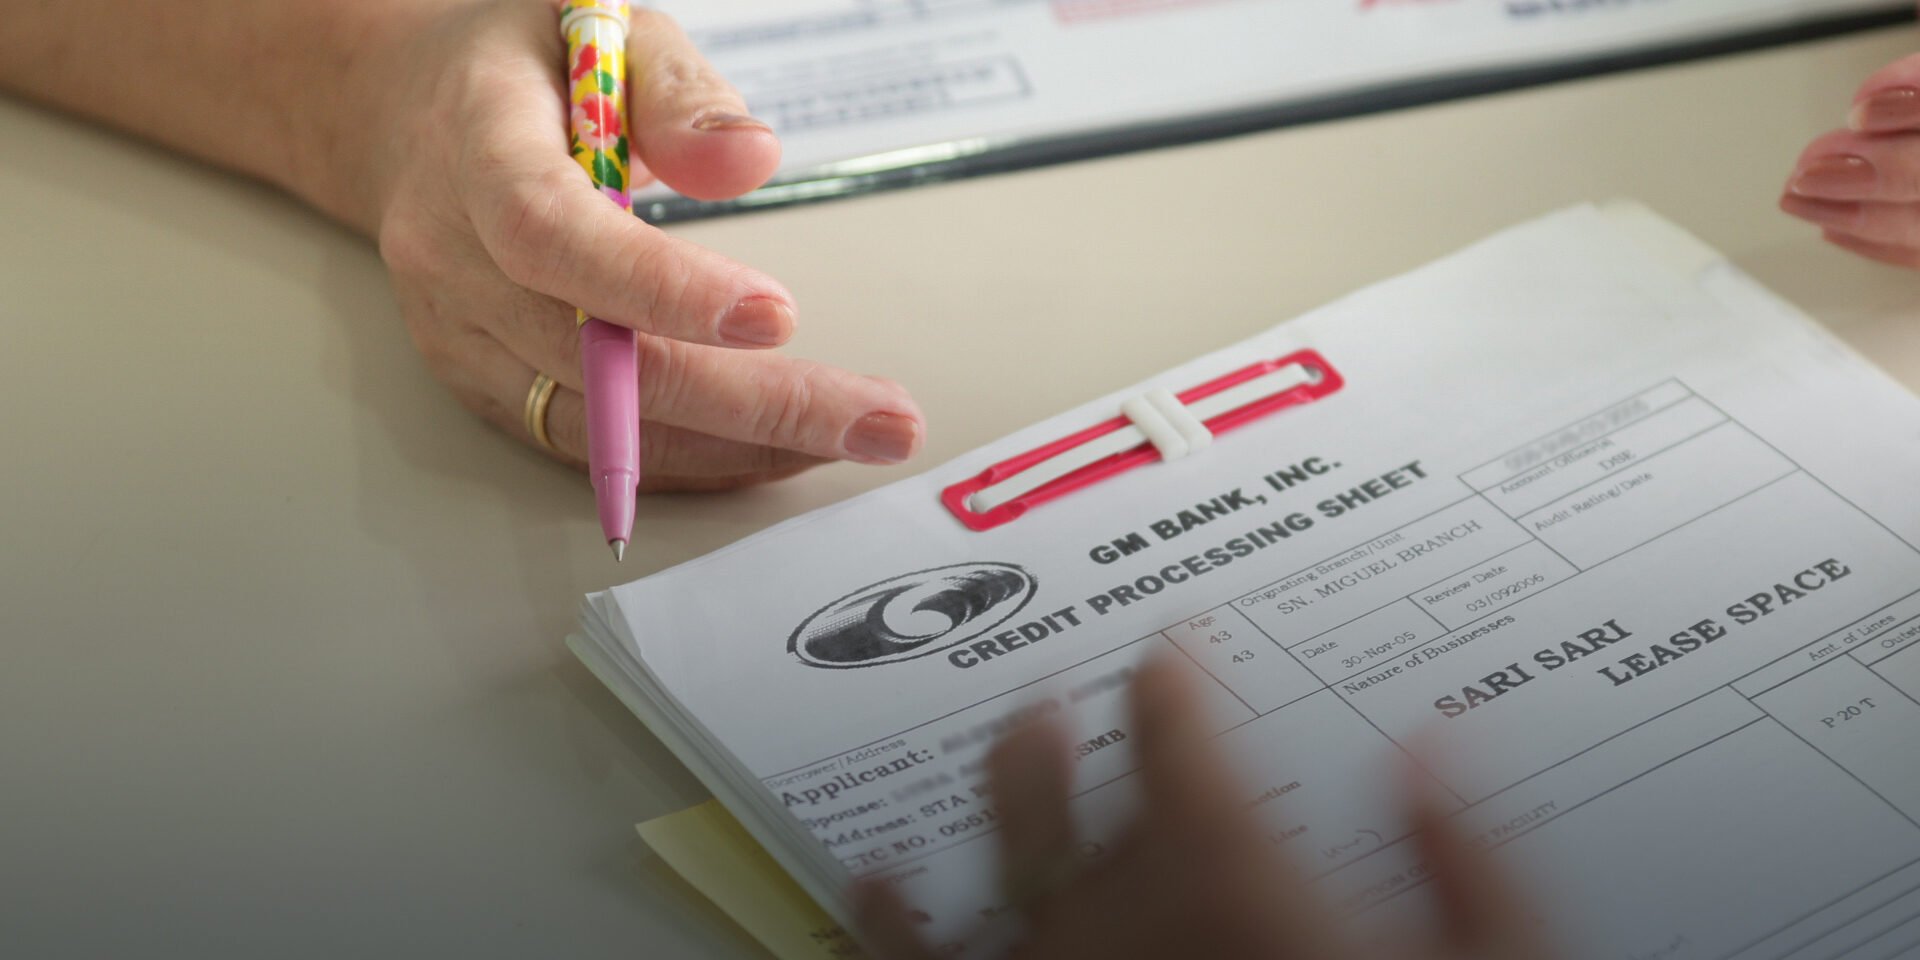 A close-up image of a credit processing form with a hand holding a pen above it.